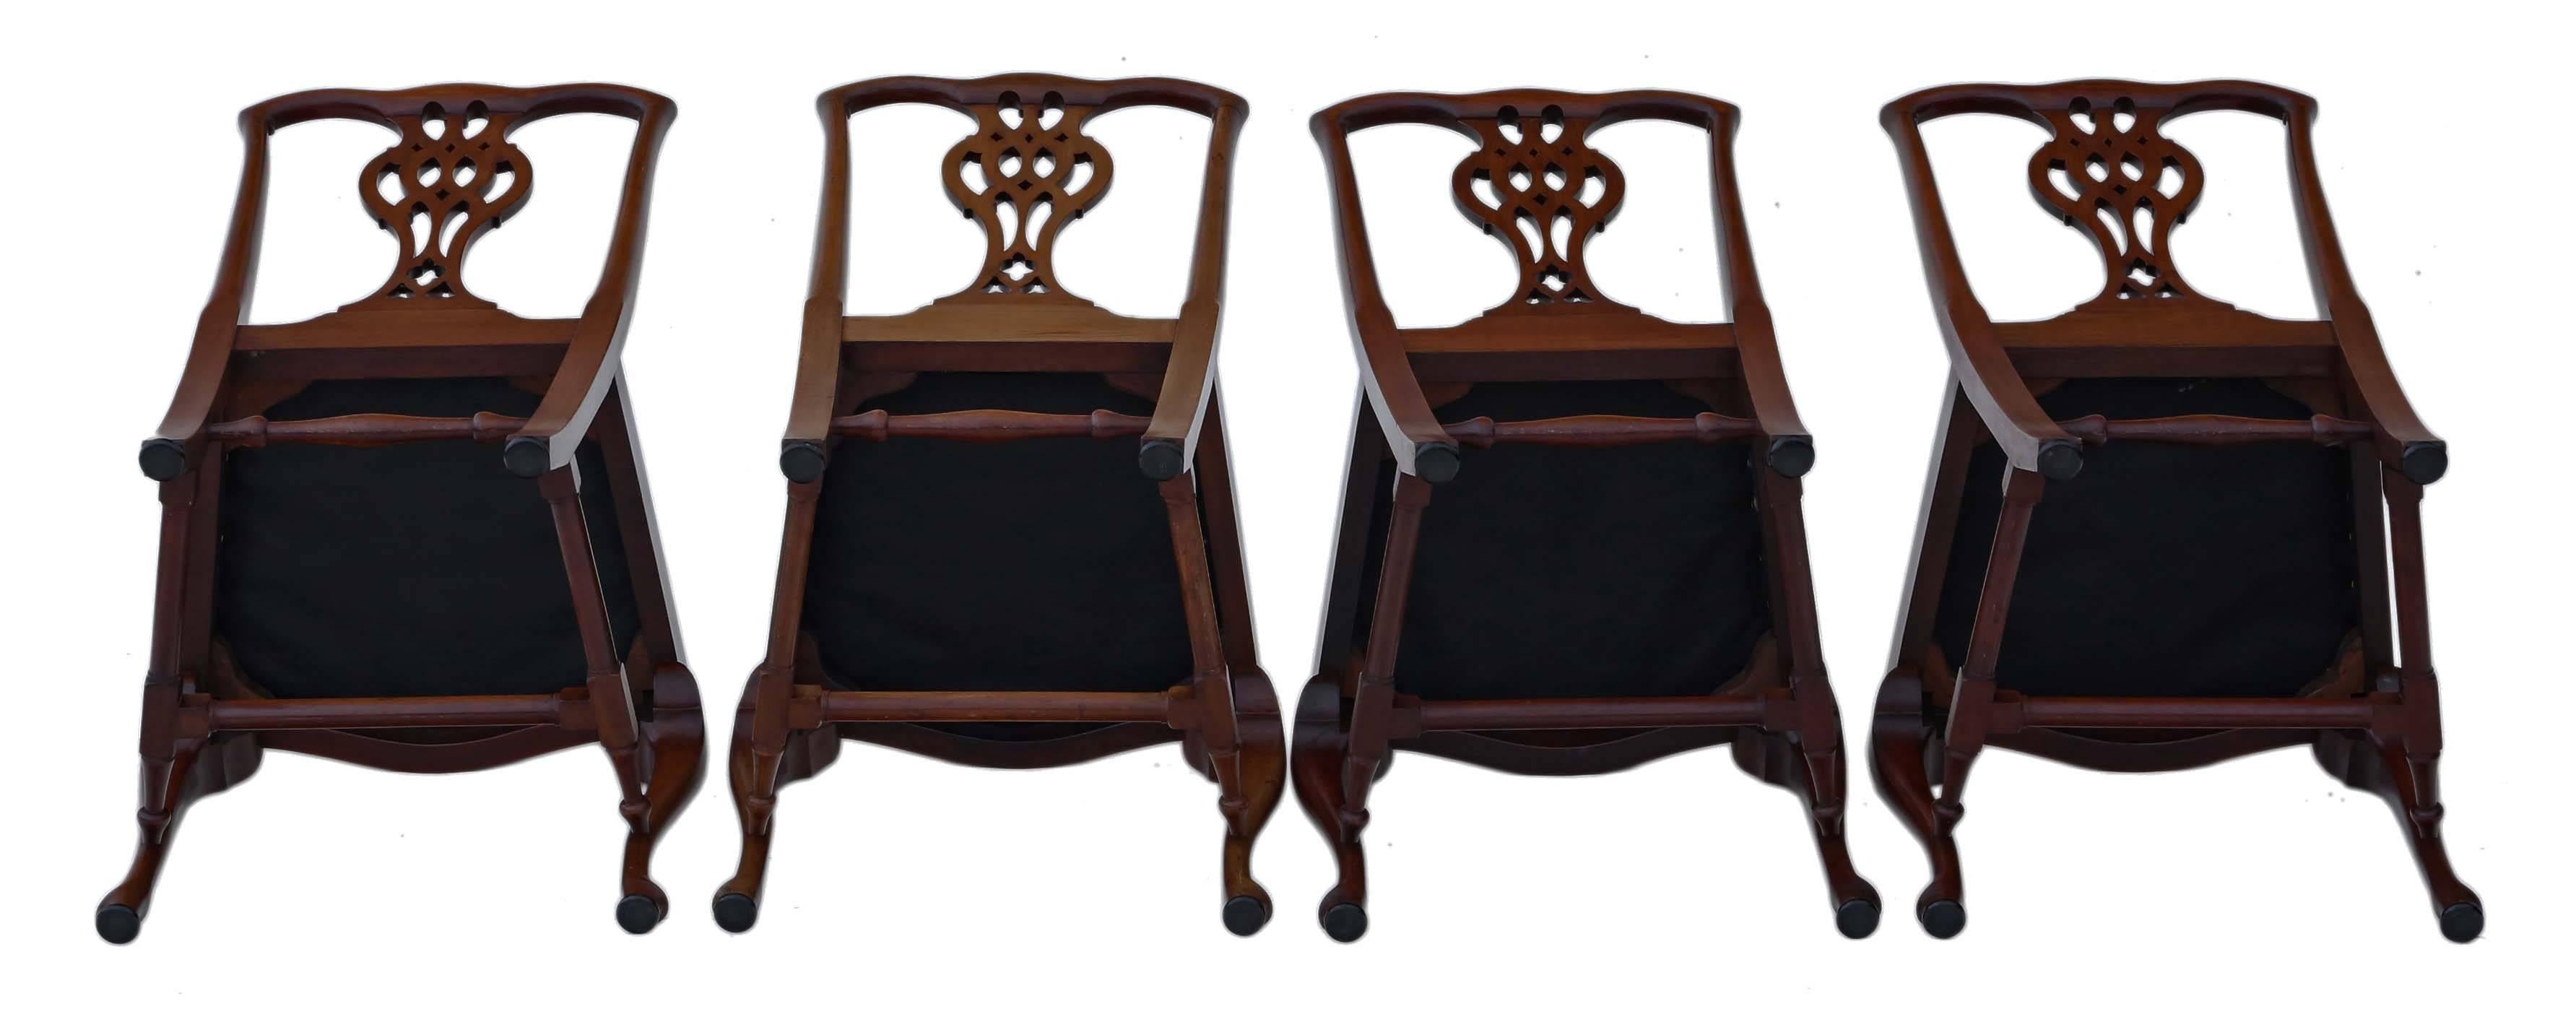 British Antique Quality Set of Four Mahogany Chippendale Revival Dining Chairs For Sale